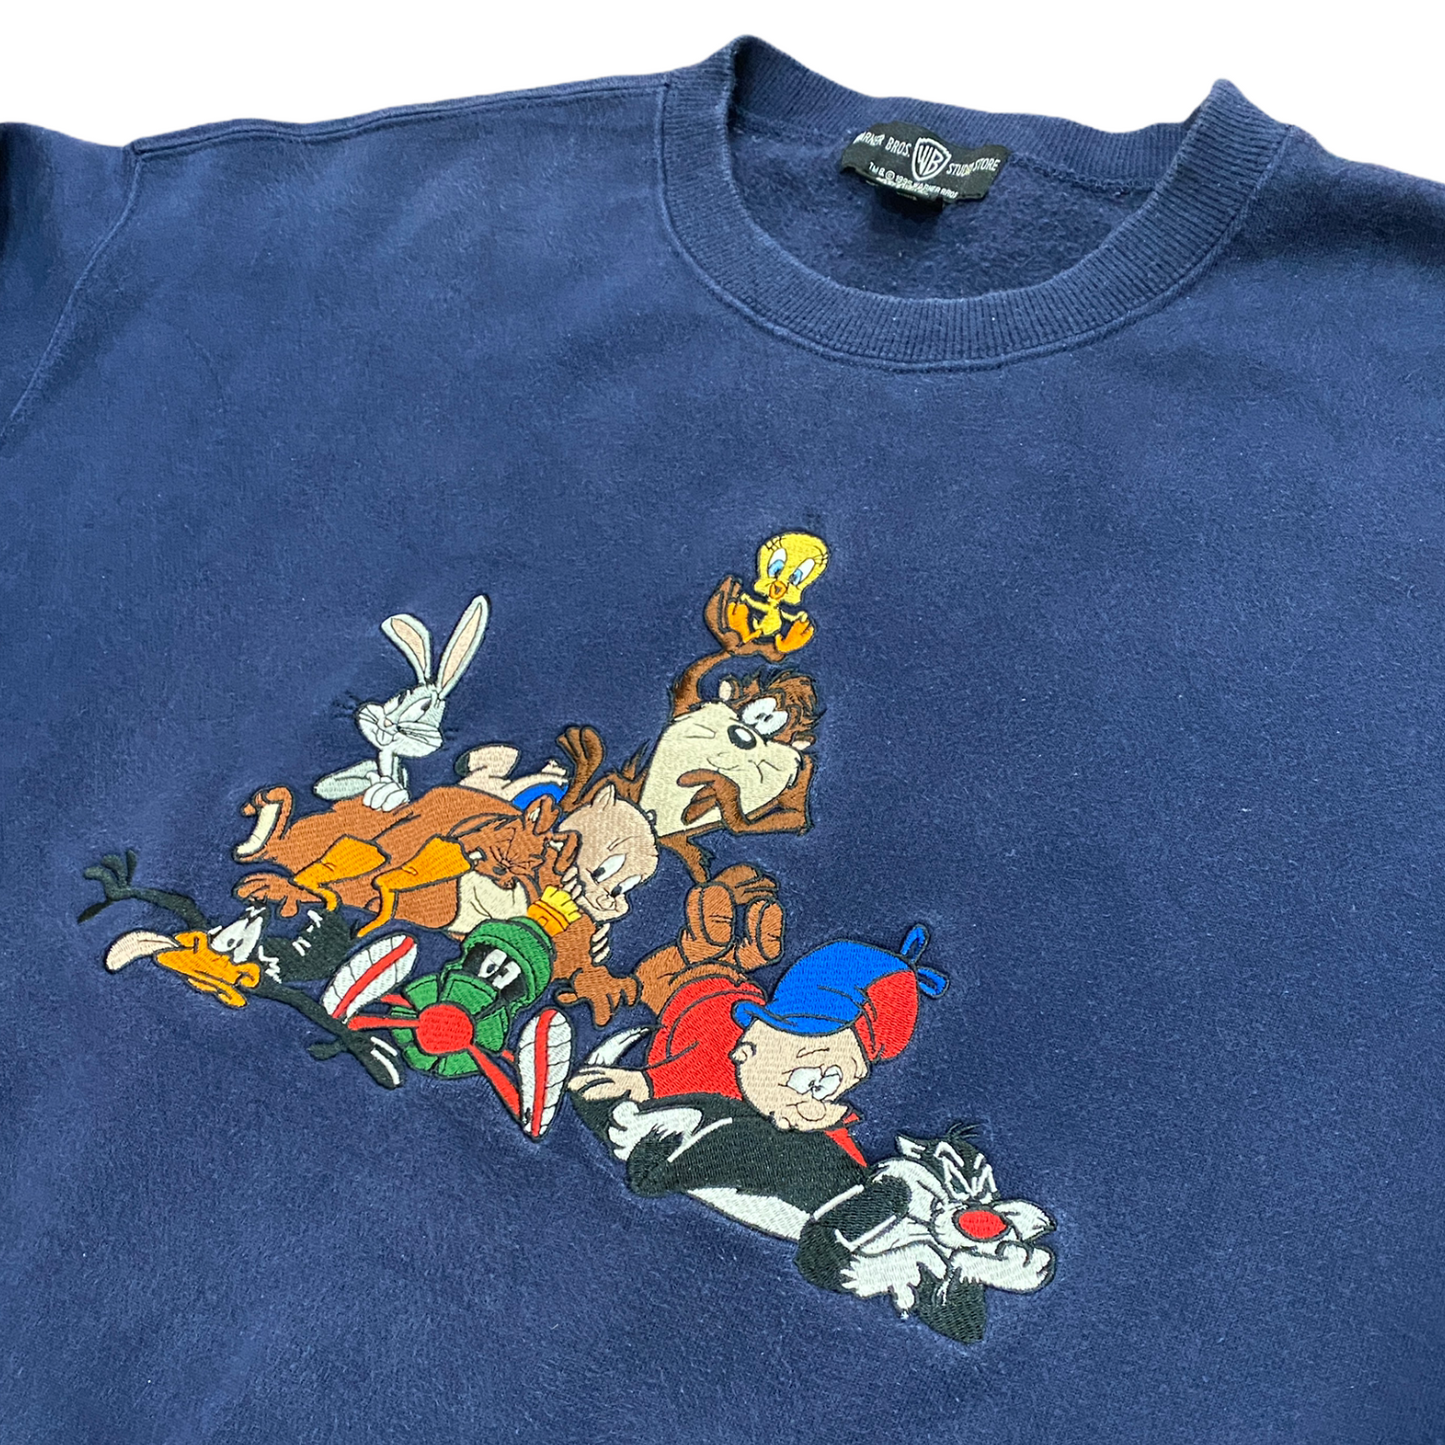 Warner Bros embroidered sweater (S-M)